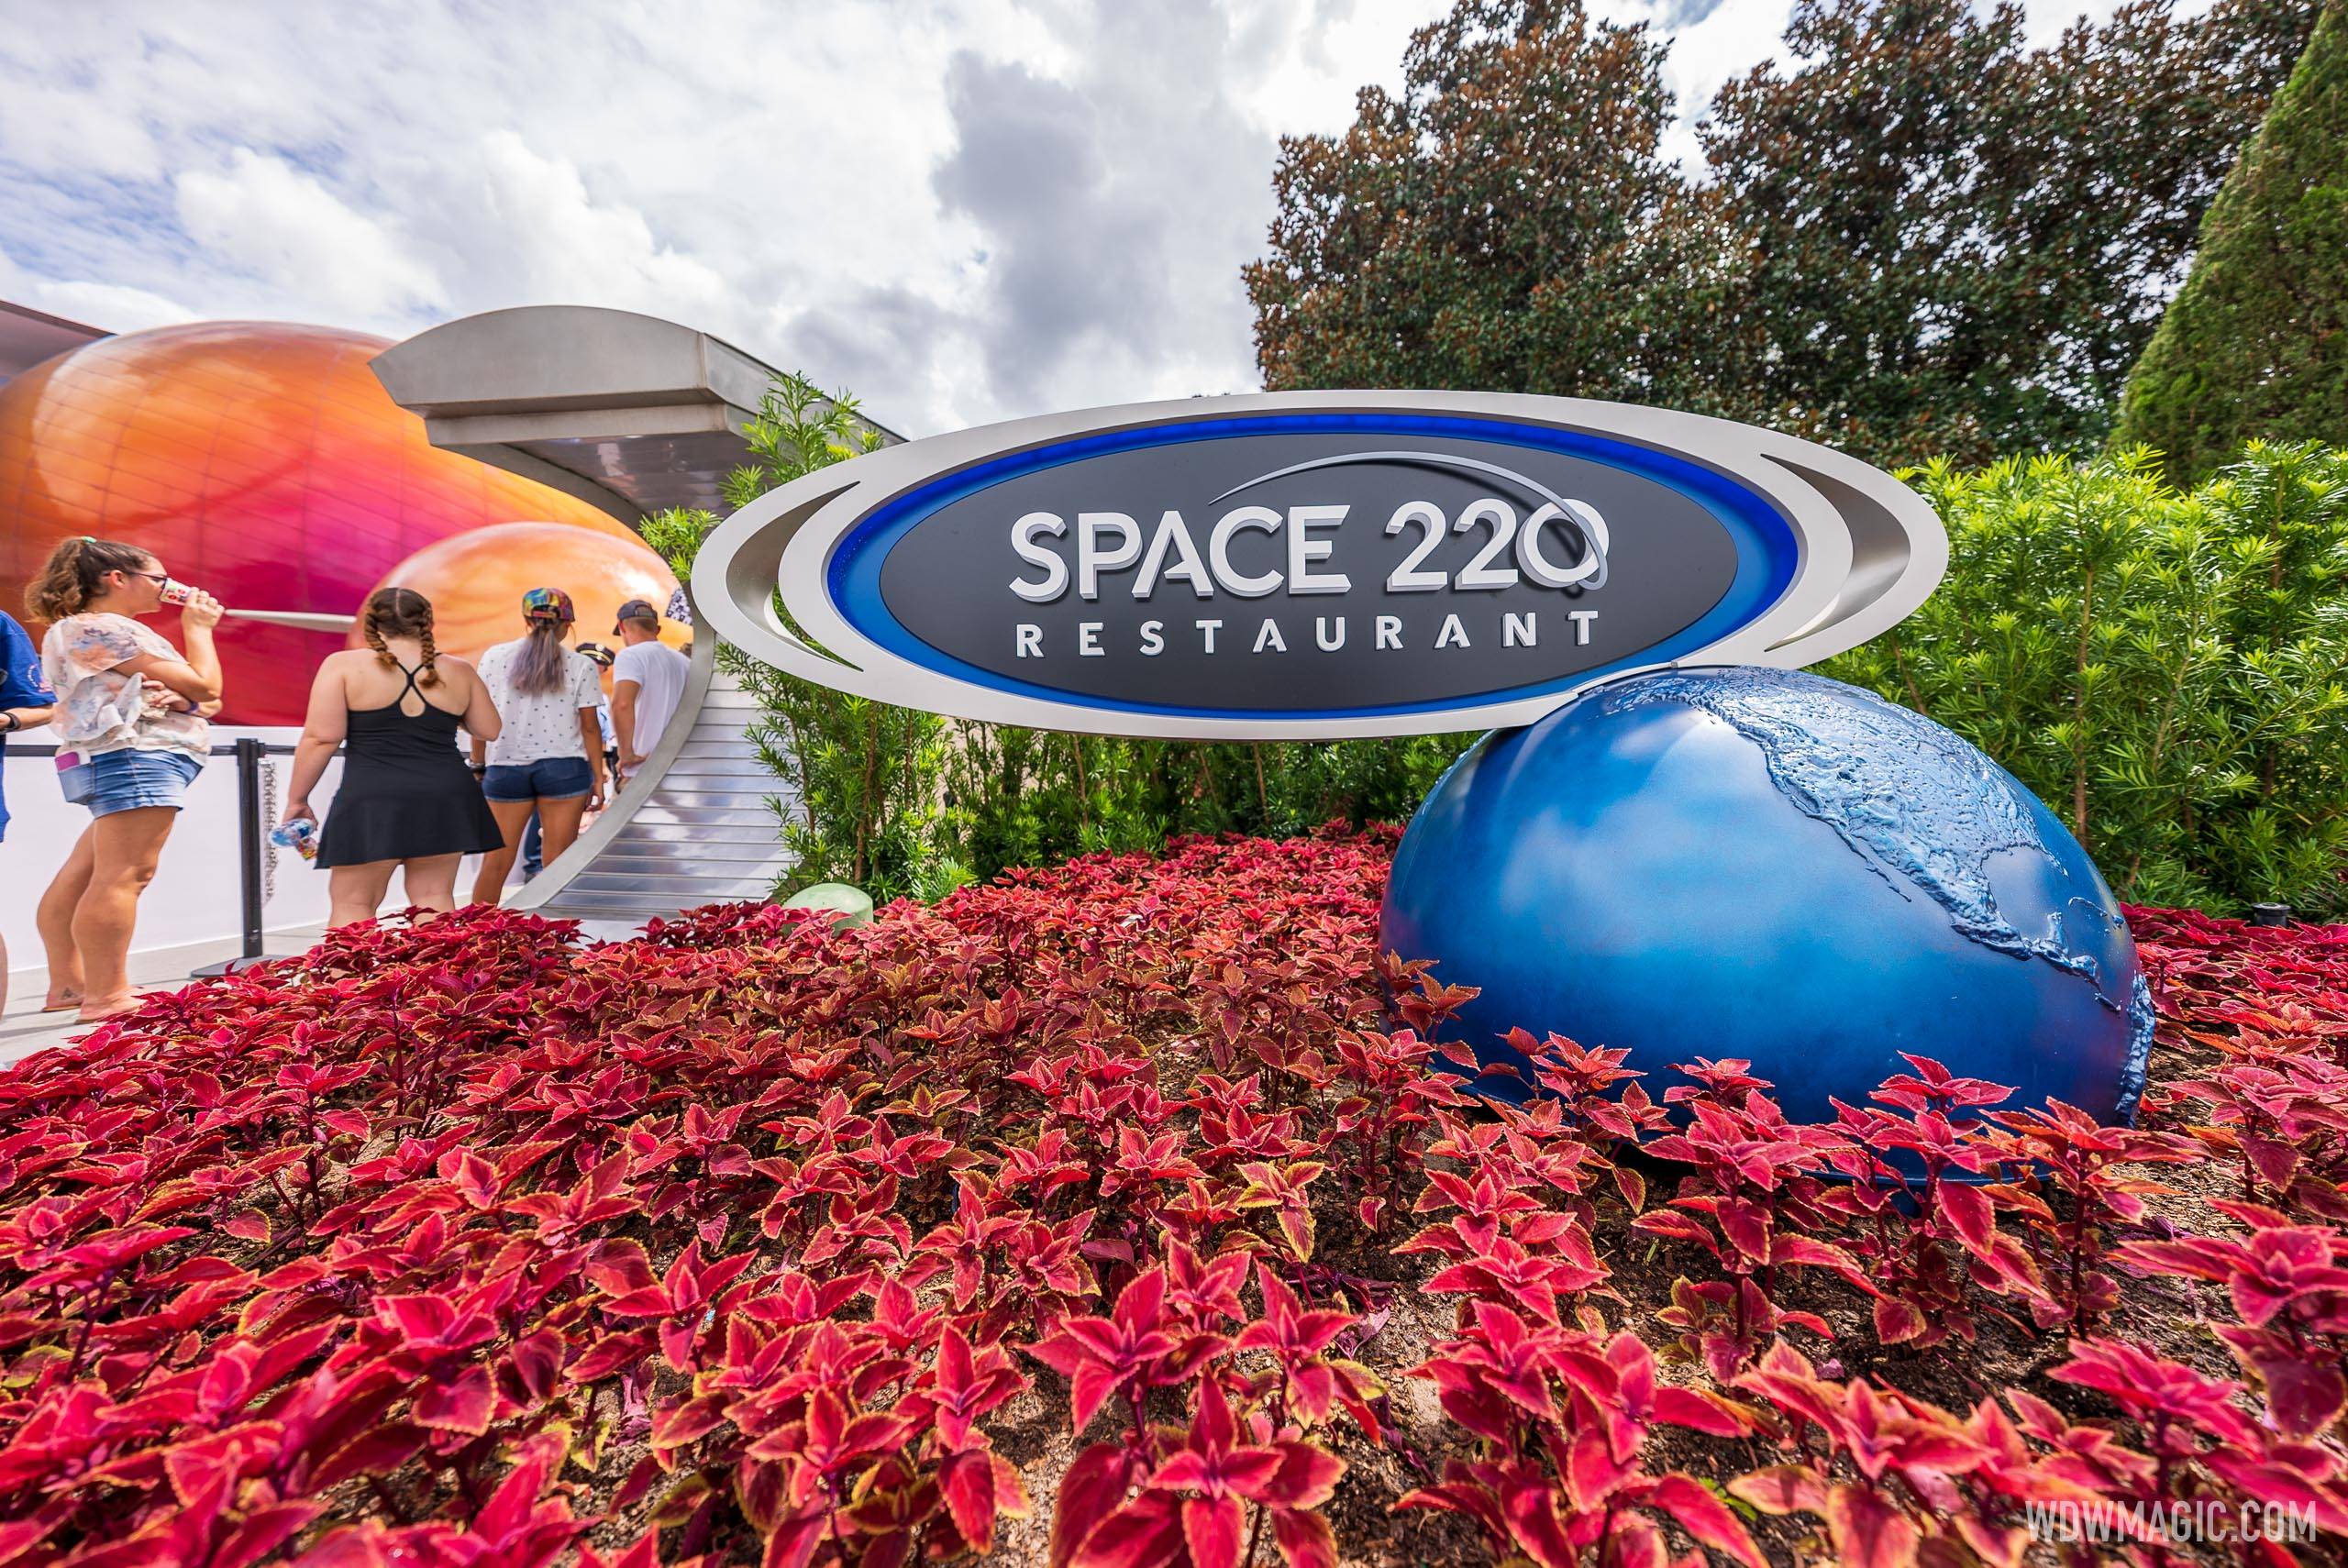 Tour of Space 220